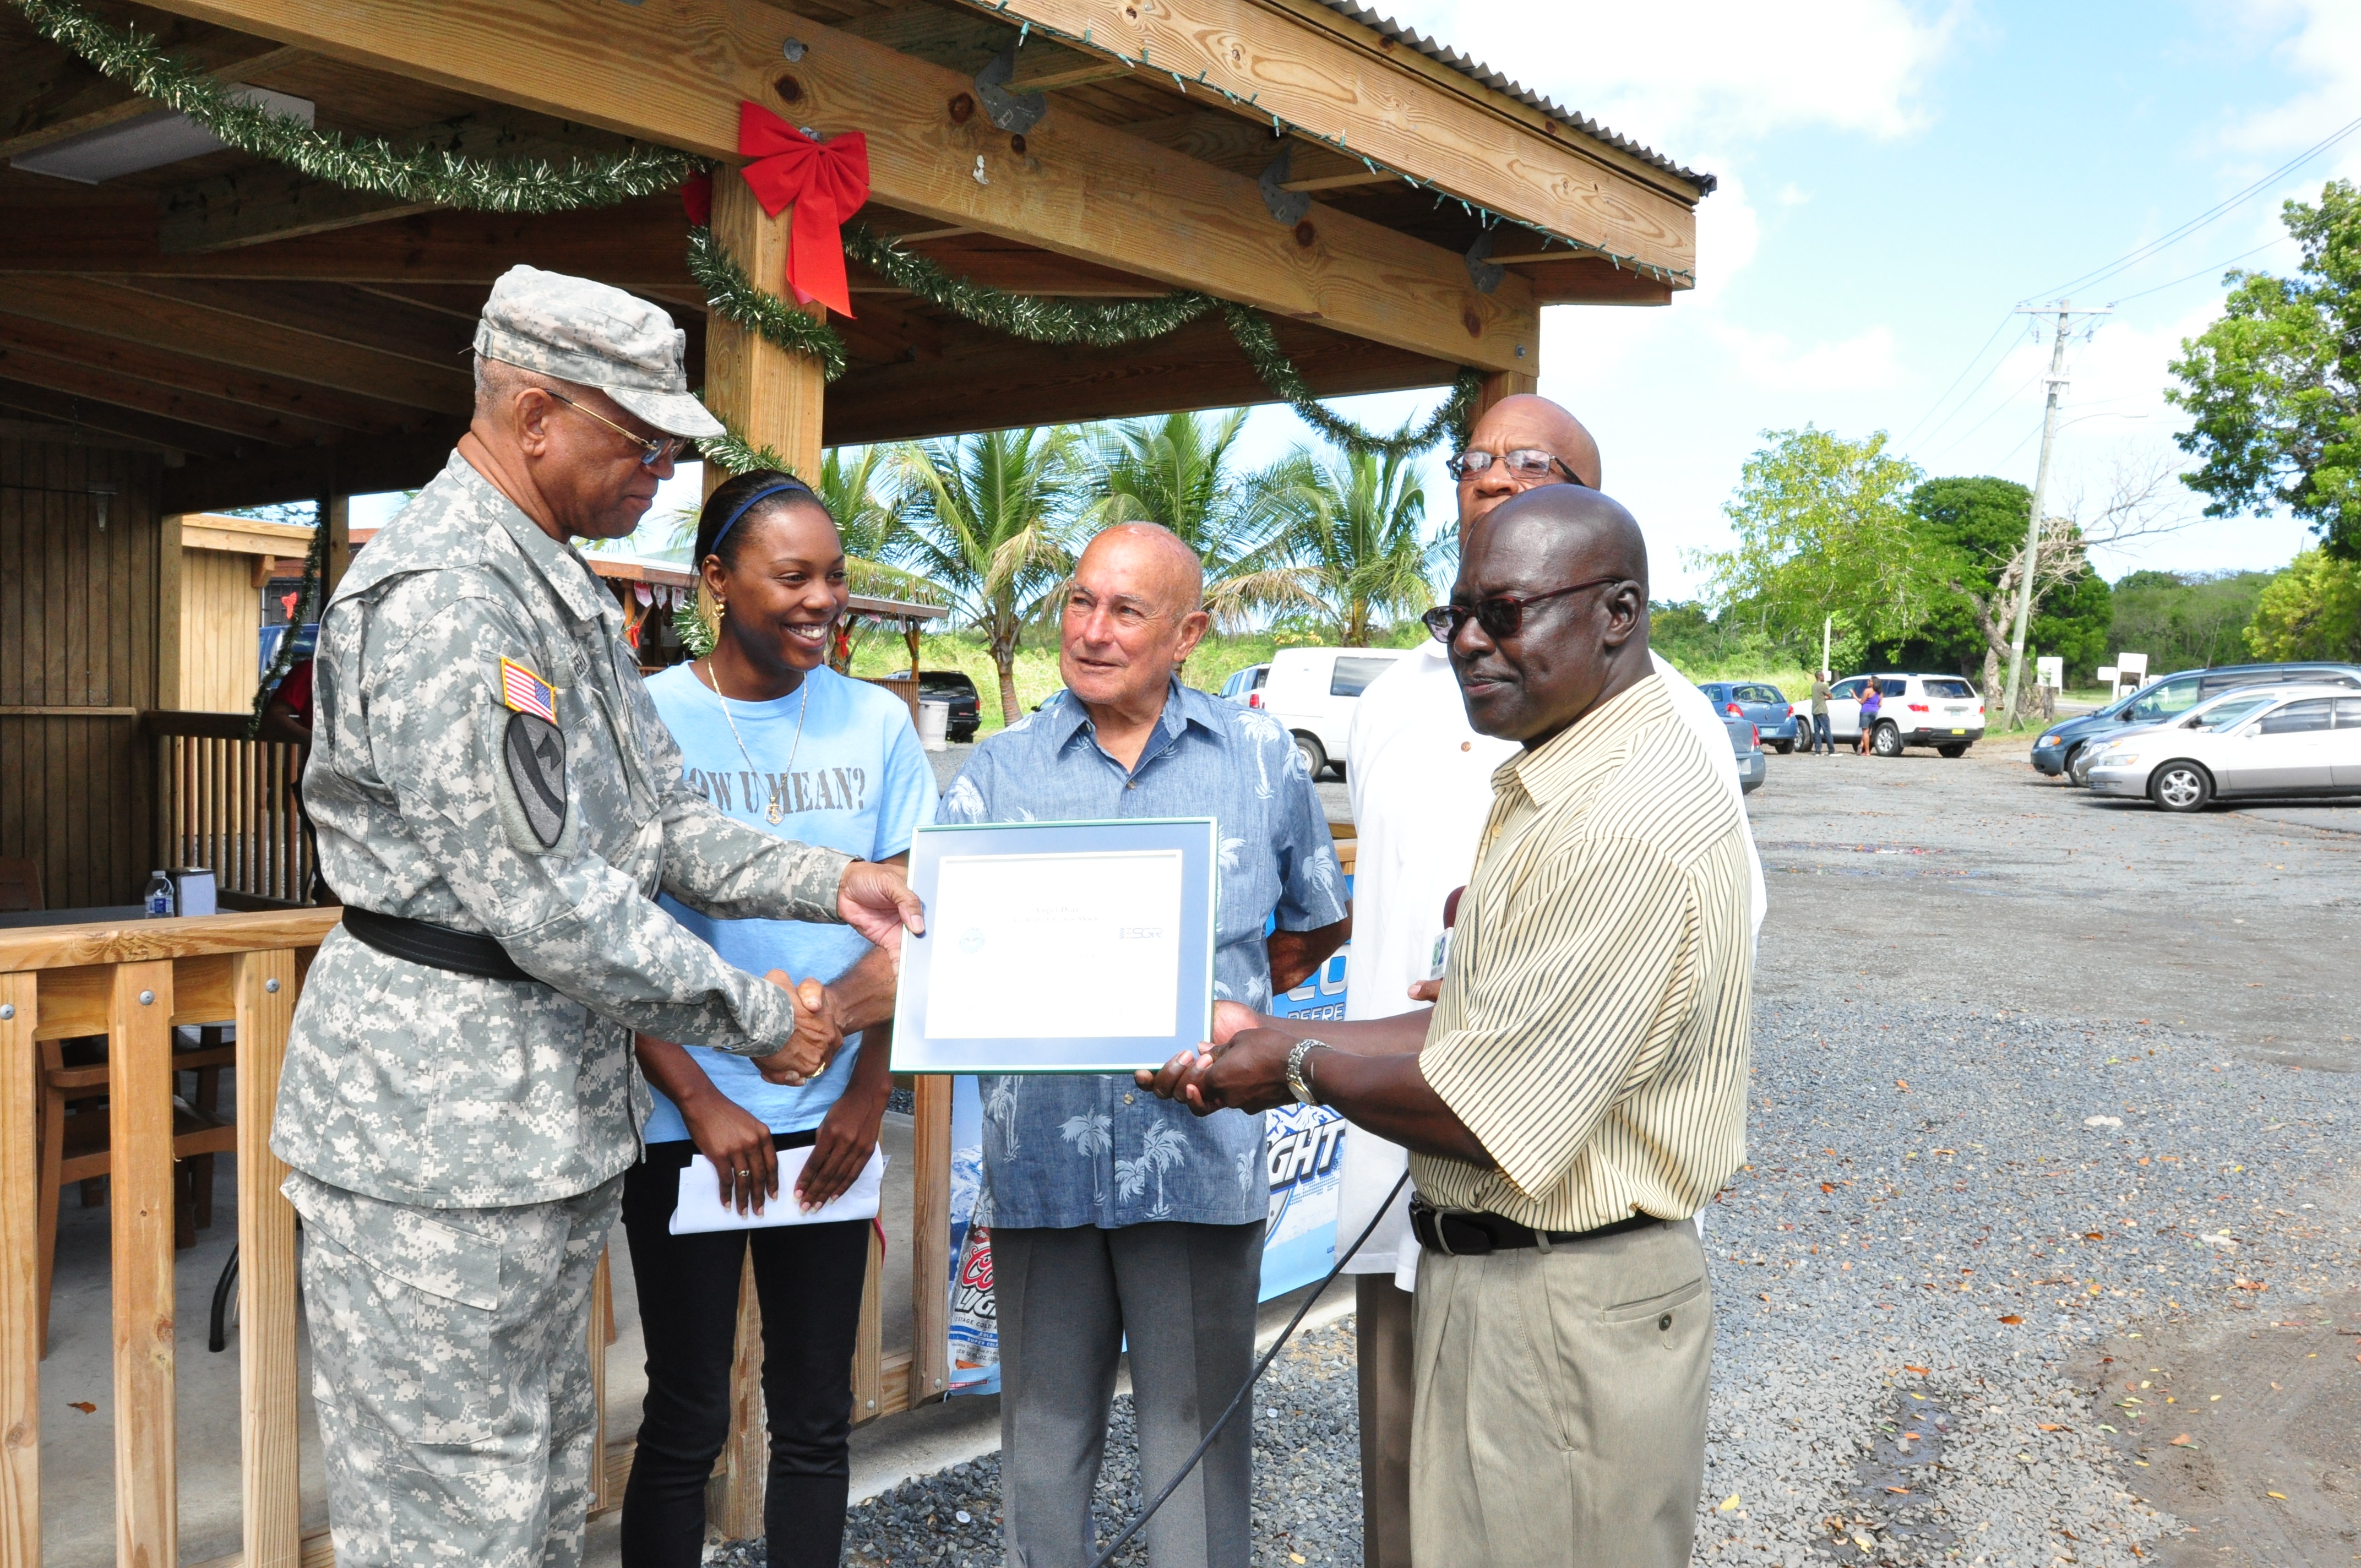 Maj. Gen. Renaldo Rivera, adjutant general of the Virgin Islands National Guard, left, Lt. Col. (Ret.) Beresford Edwards, Employer Support of Guard and Reserve (ESGR) chair, right, and Mr. Paul Radix, ESGR manager of employer outreach, second from right, present Mr. Angel Diaz with the DoD Patriot Award Friday at La Reine Chicken Shack. Diaz, owner of La Reine Chicken Shack was nominated by Spc. Felicia Herman (second from left) for his outstanding support of her as an employee and as she fulfills her commitments to the VING. (VING photo by Sgt. Juanita Philip-Mathurin).	